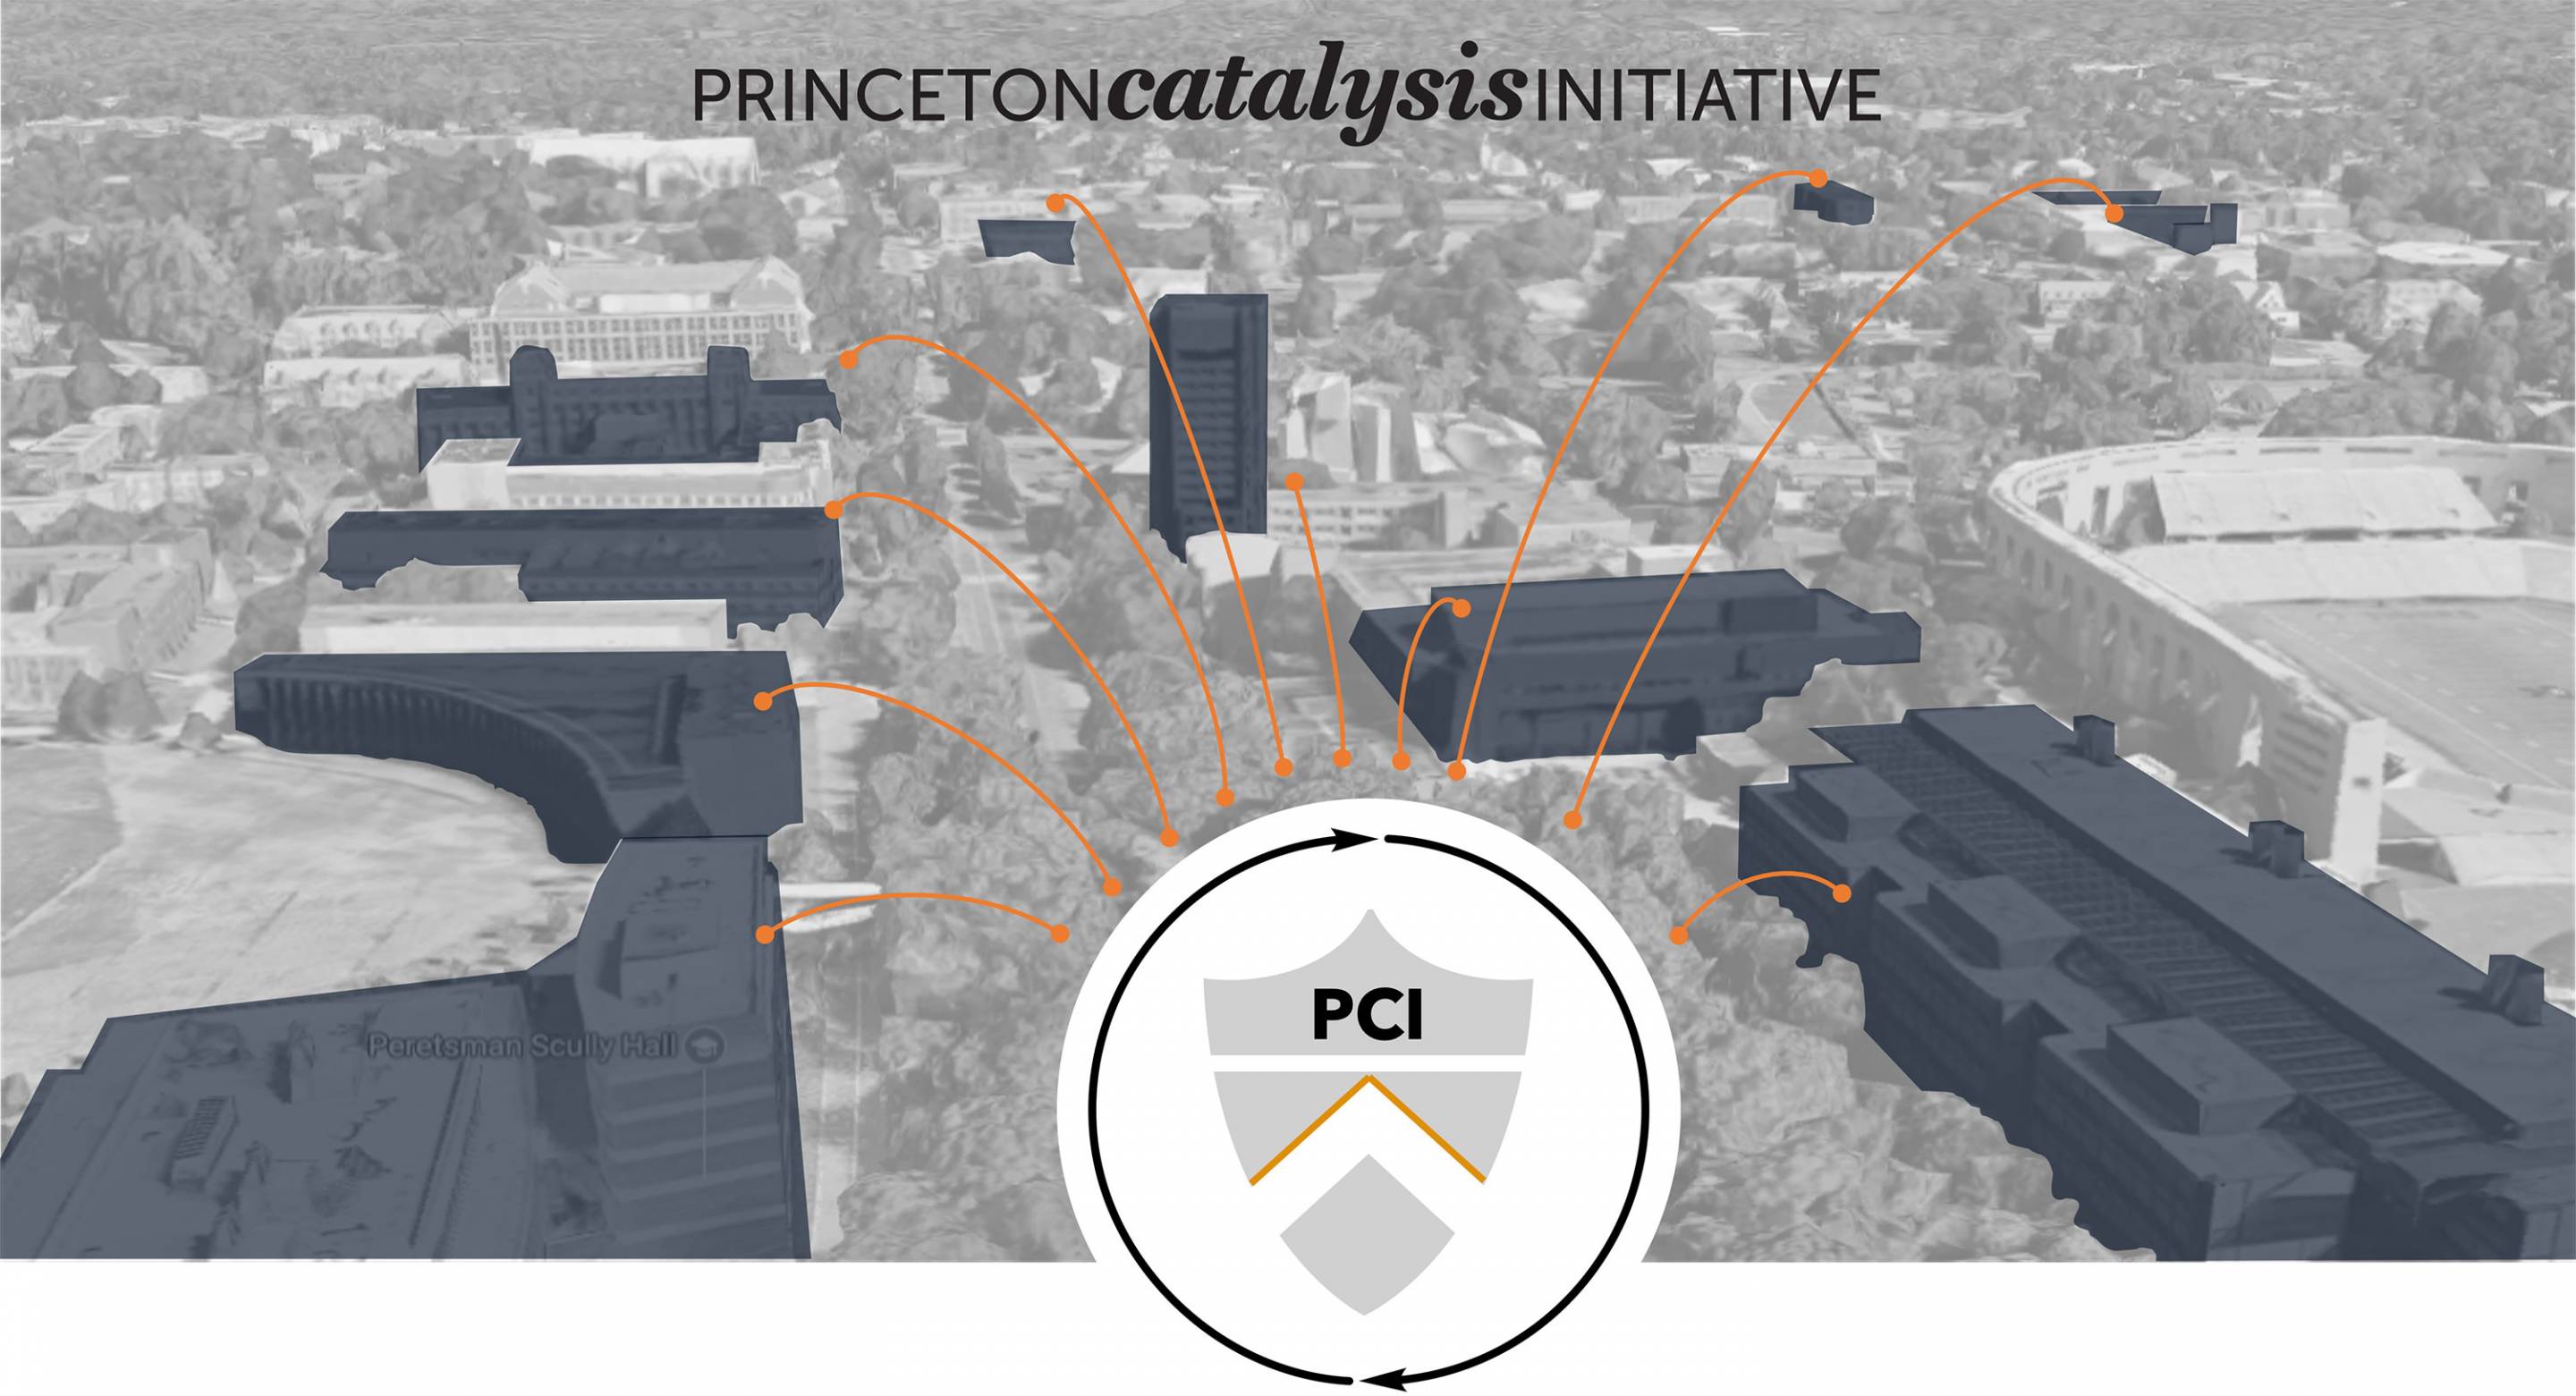 Princeton Catalysis Initiative logo, shield, and aerial photo of buildings where activities are occurring.